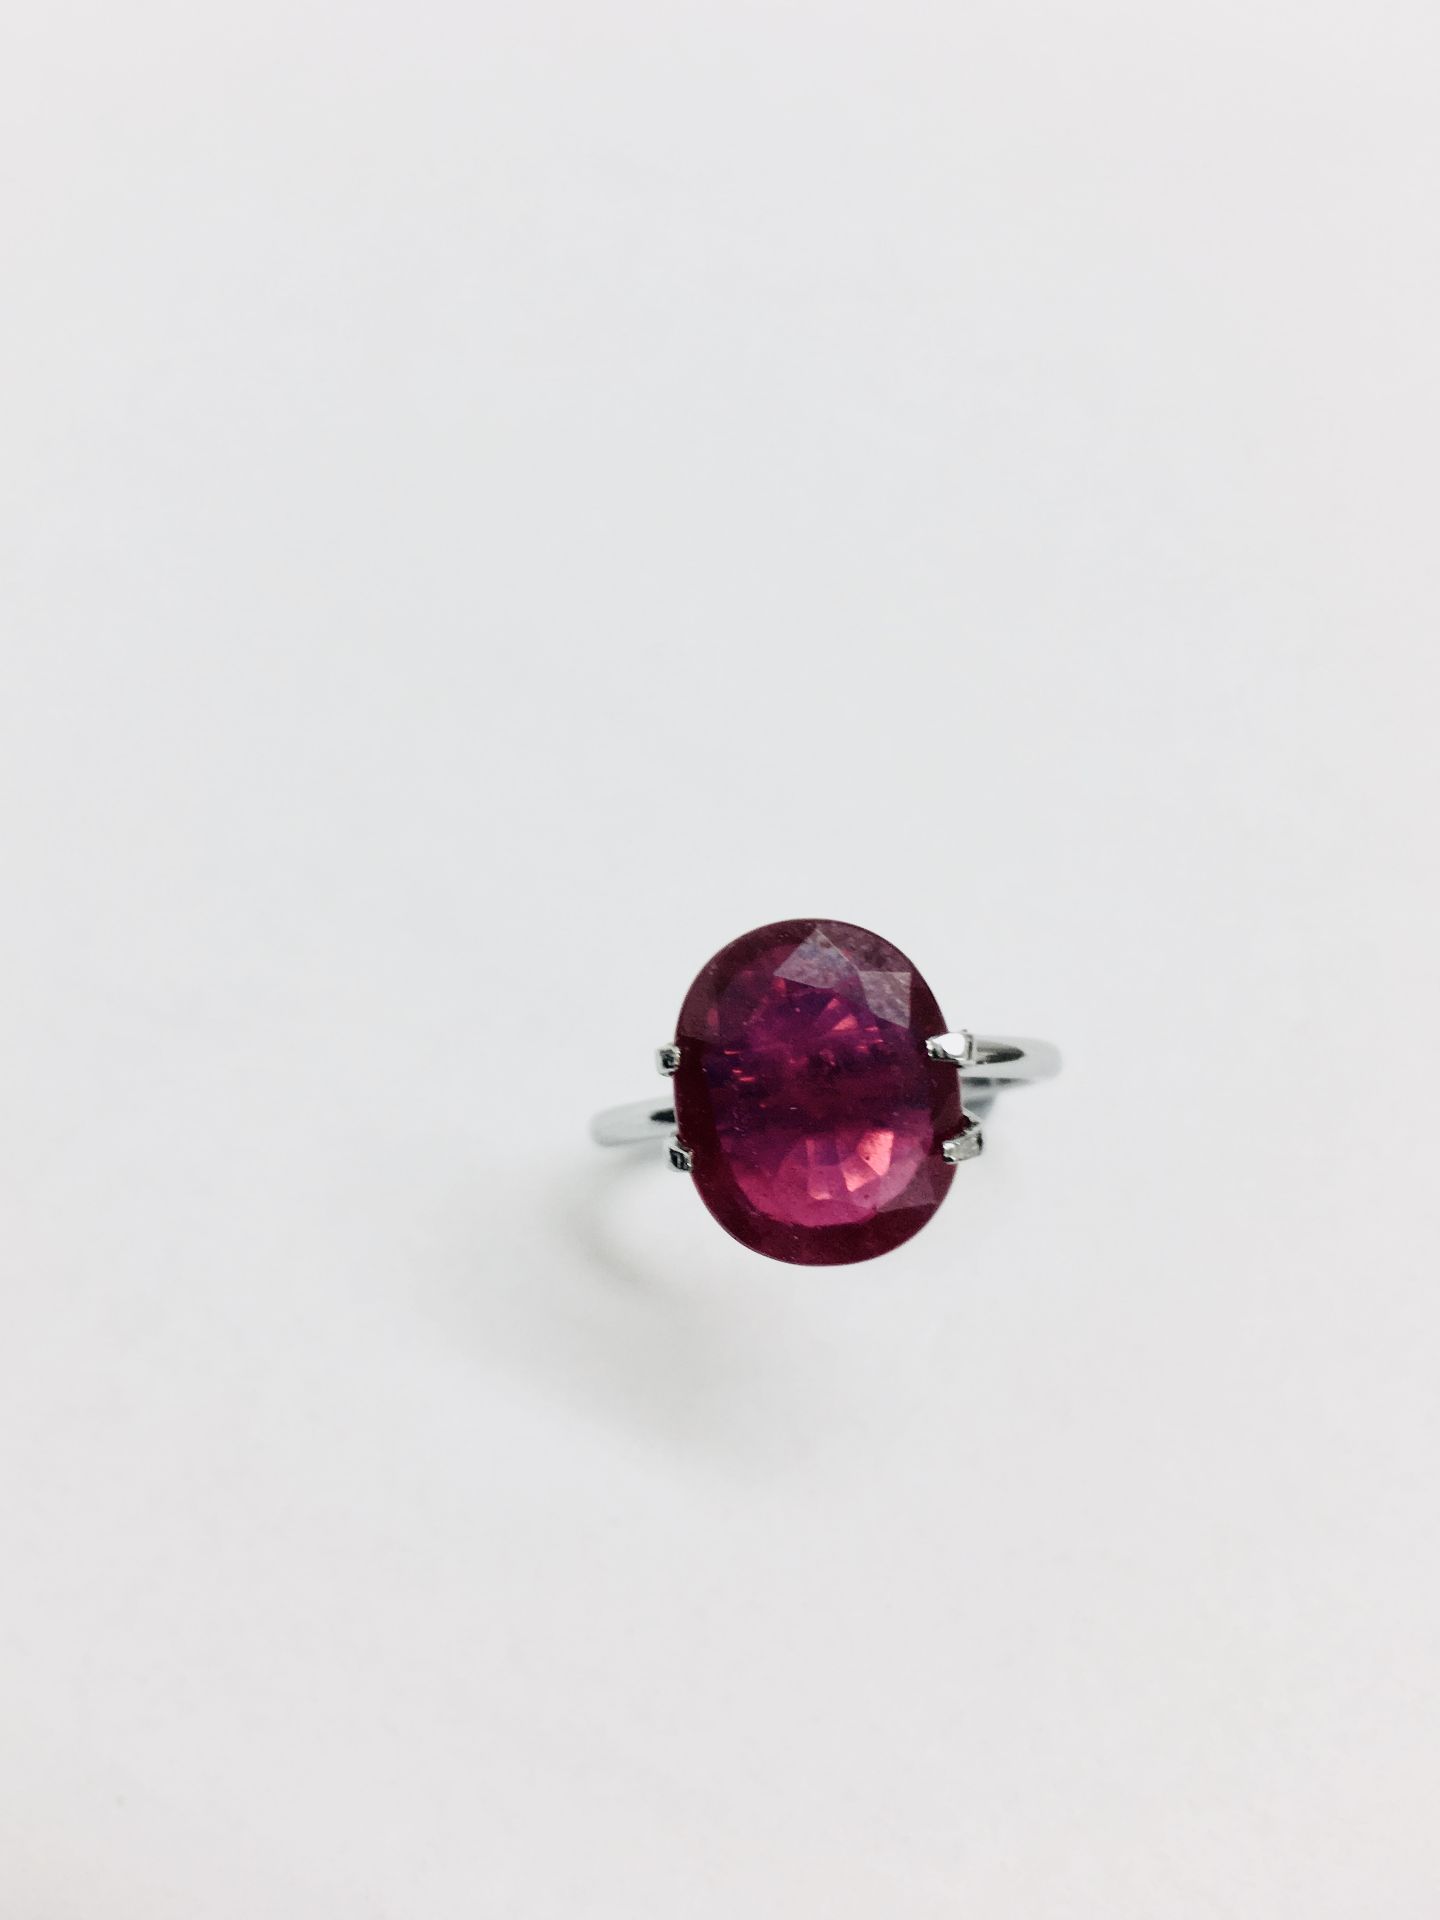 5.02ct ruby,Enhanced by Frature,good clarity and colour,12mmx10mm ,valued at 800 - Image 4 of 4